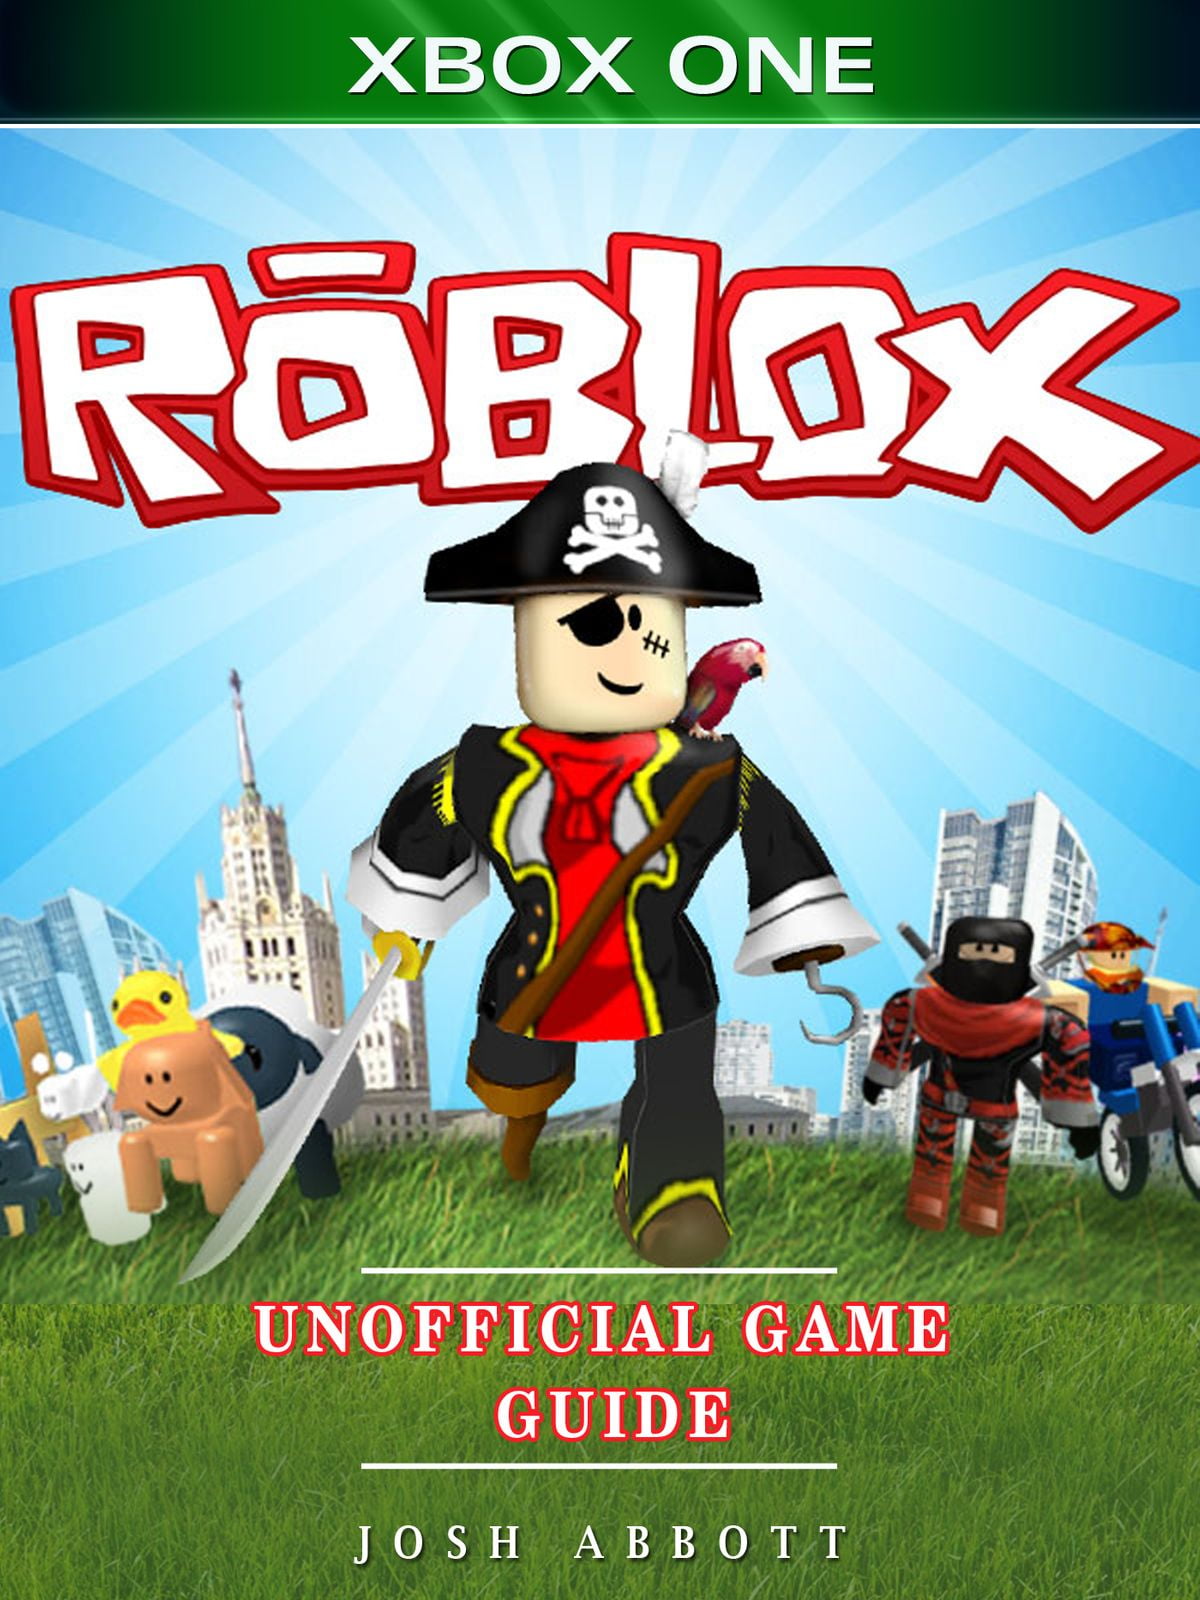 Roblox Xbox One Unofficial Game Guide Ebook Walmart Com